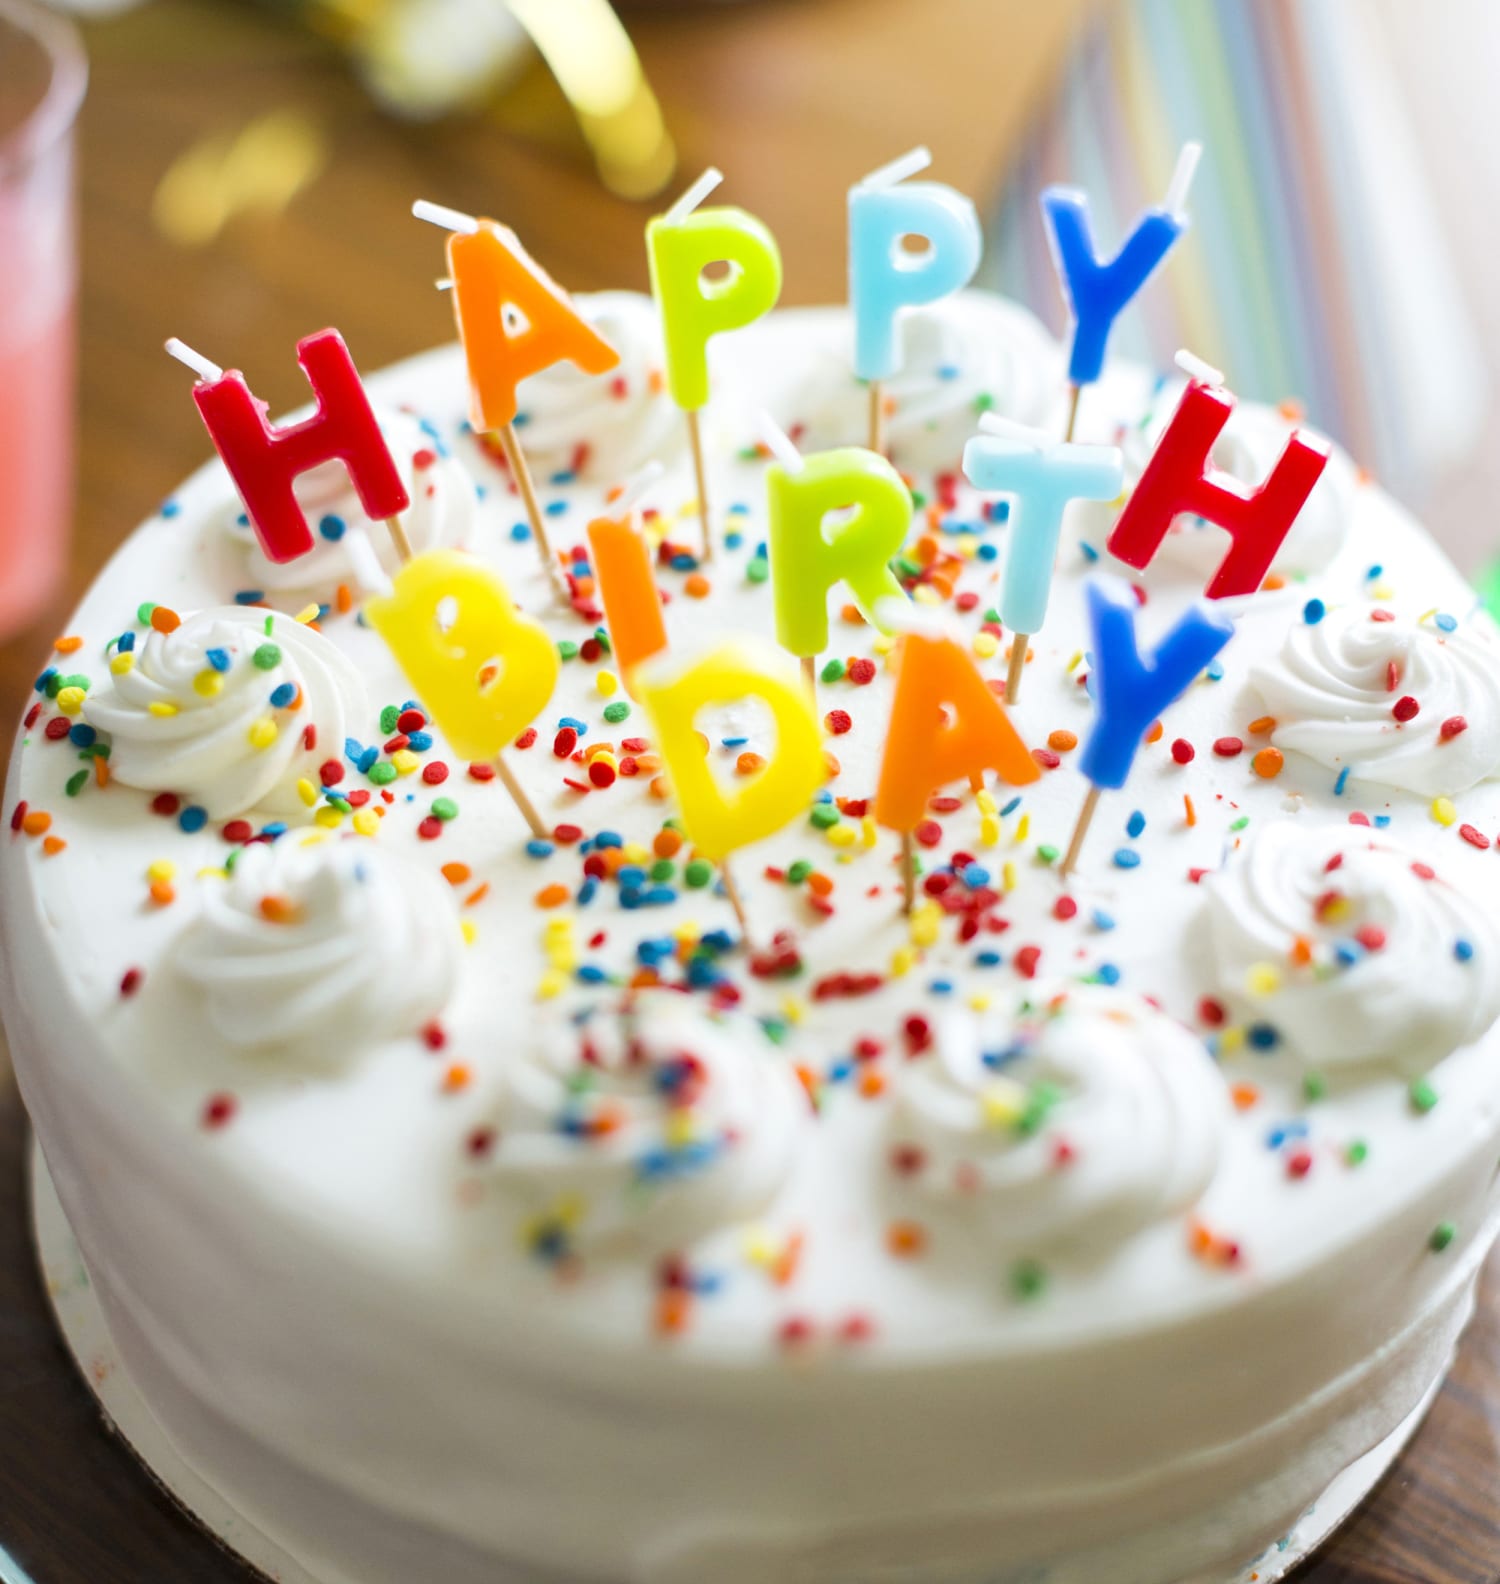 U S Judge Rules Copyright For Happy Birthday To You Invalid